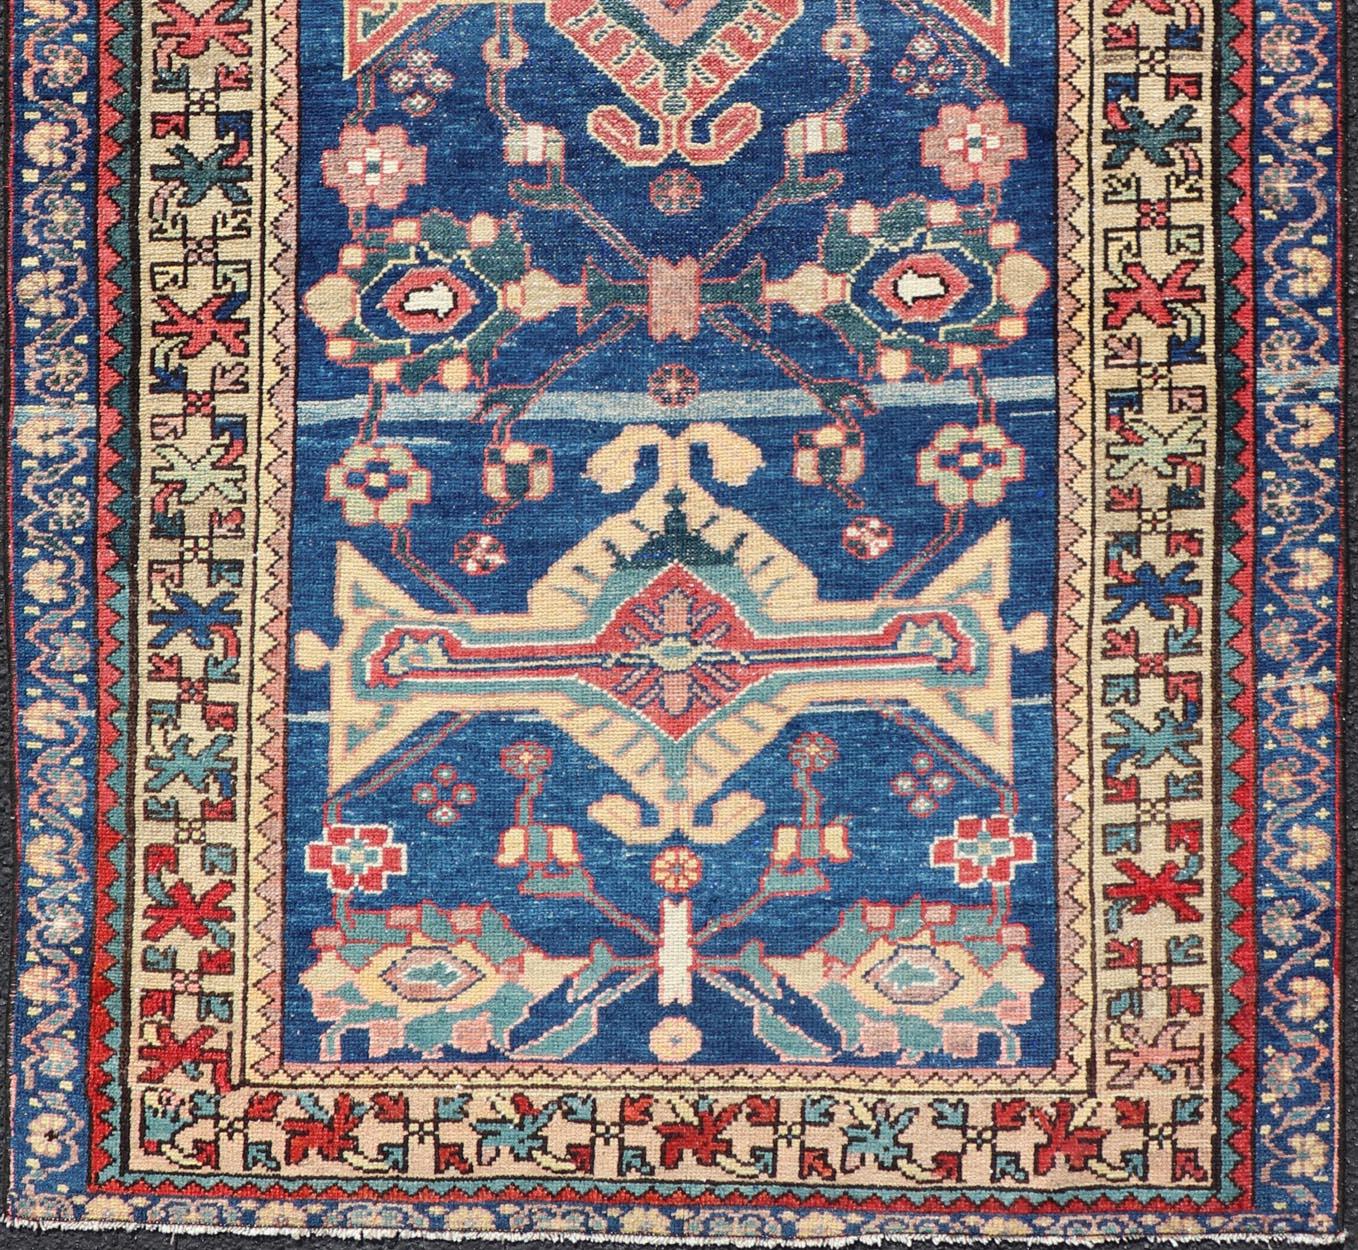 Measures: 3'4 x 6'1 
Antique Persian Hamadan Rug with Colorful Geometric Medallion on A Blue Field. Keivan Woven Arts / rug EMB-22155-15082, country of origin / type: Iran / Hamadan, circa 1920.

This antique Persian Hamadan rug (circa early 20th